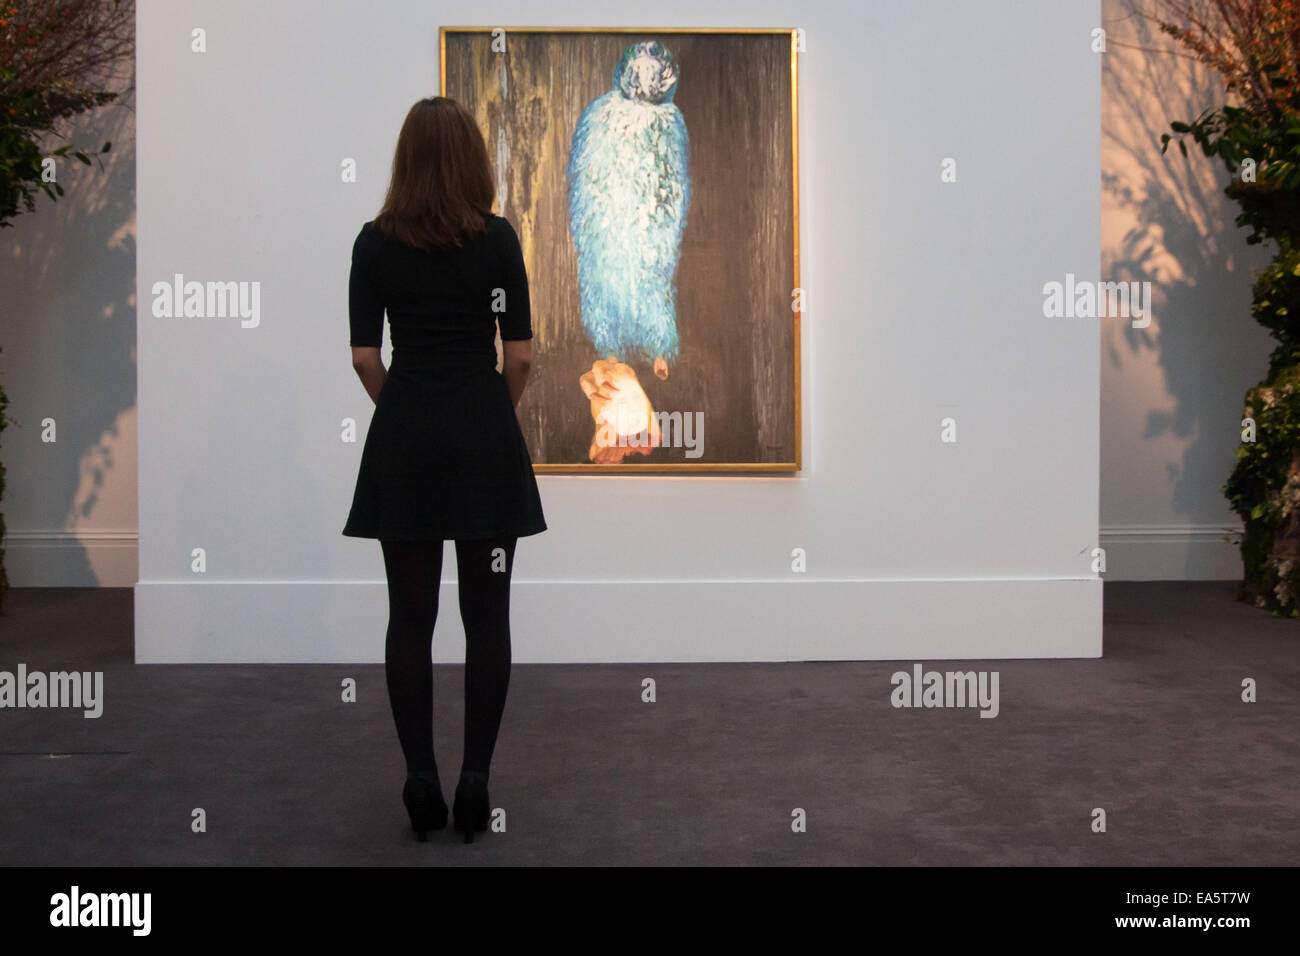 Sotheby's, Mayfair, London, November 7th 2014. Several outstanding examples of Czech avant-garde art from the Roy and Mary Cullen collection are to be auctioned by Sotheby’s on November 12th. PICTURED: A woman gazes at Toyen's The Message of the Forest, which is expected to fetch up to £1 million at auction. Credit:  Paul Davey/Alamy Live News Stock Photo